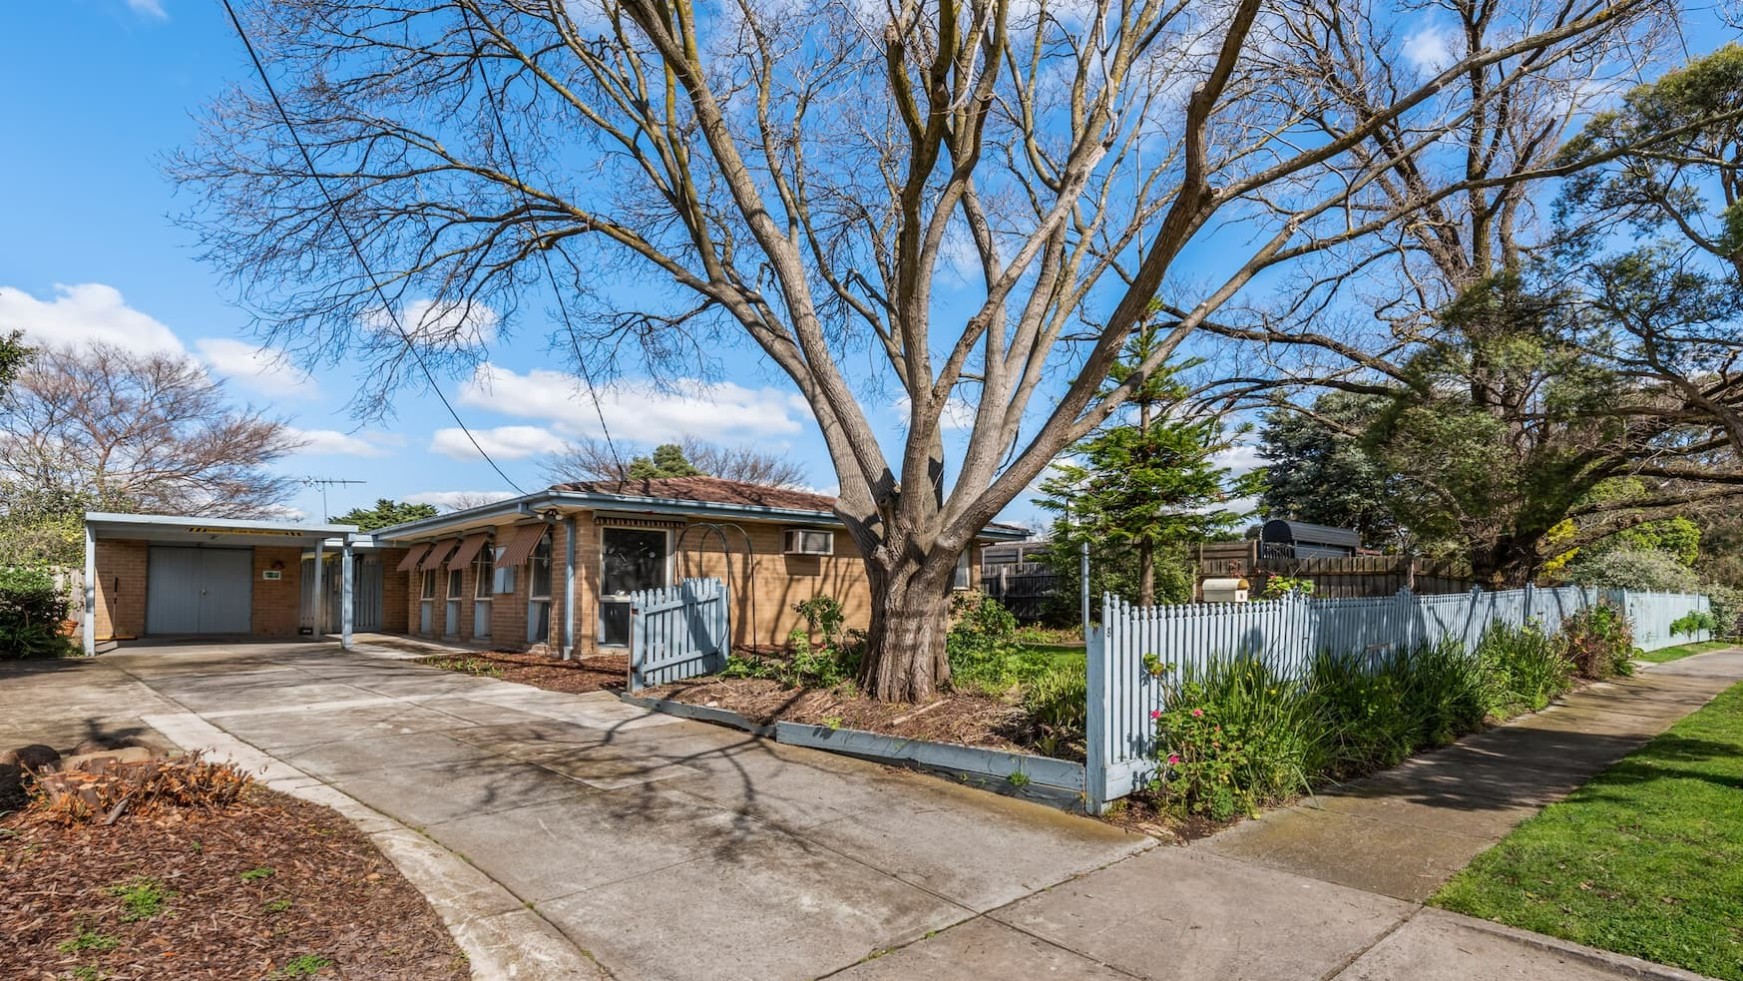 --Front of Templestowe house with a large tree in the front yard, light blue fence and a concrete driveway leading to the house.--